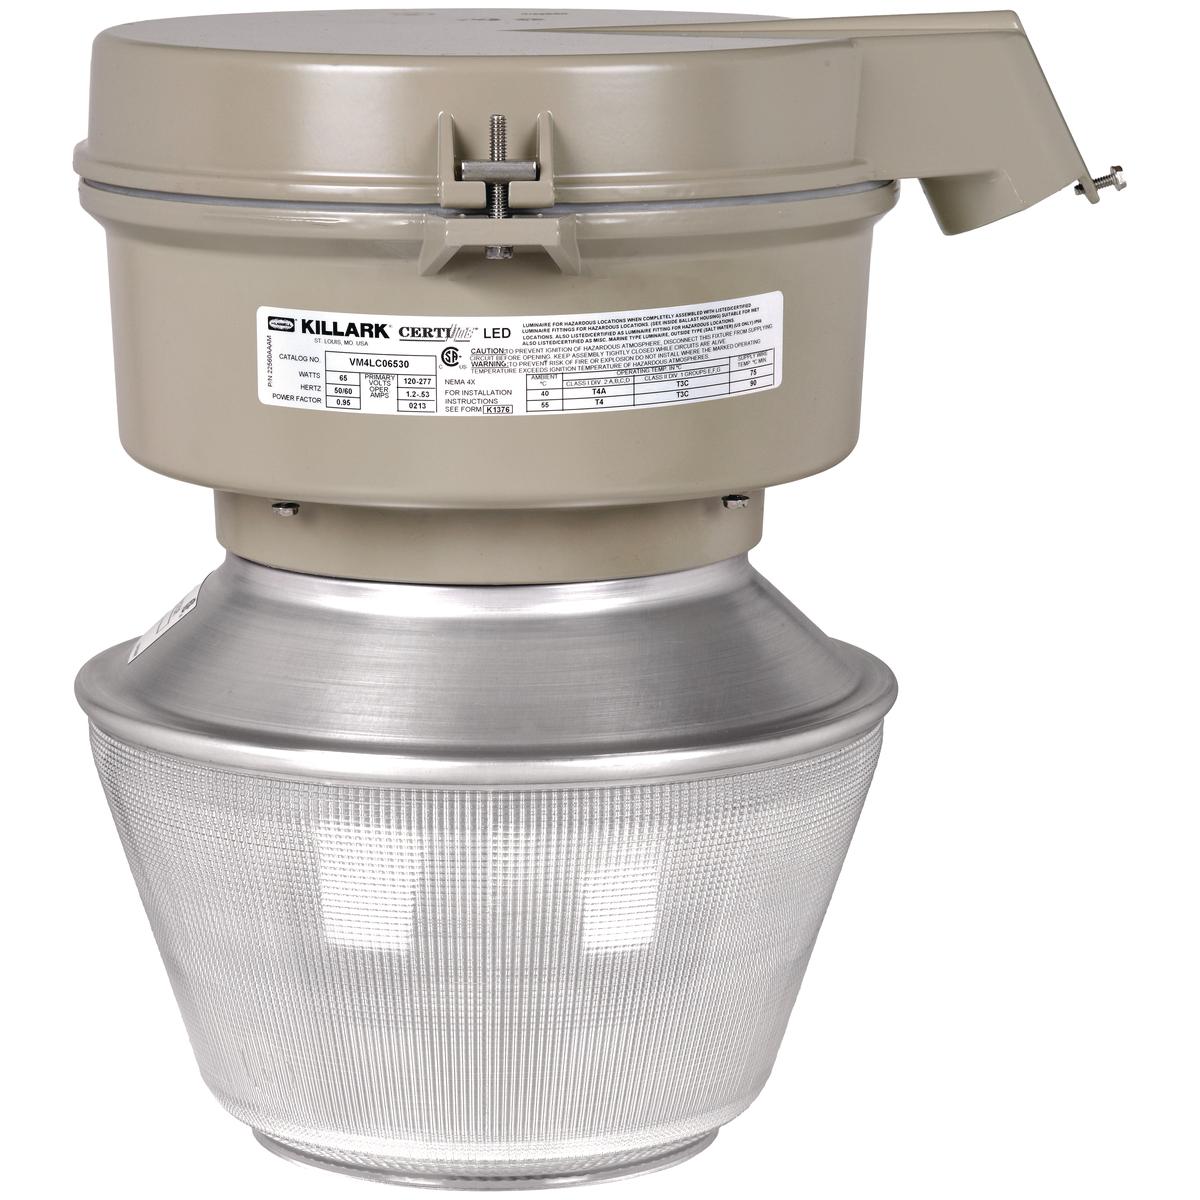 Hubbell VM4LC730D4P5 VM4LC 120-277V 1-1/4" 25 Degree Stanchion Mount Polycarbonate Spin-Top Type 5 Refractor with Guard  ; Supplemental 20KA/10KV Surge Protection is standard for 120-277 VAC models & 10KA/10KV Surge Protection is standard for 347-480 VAC models. ; Traditional